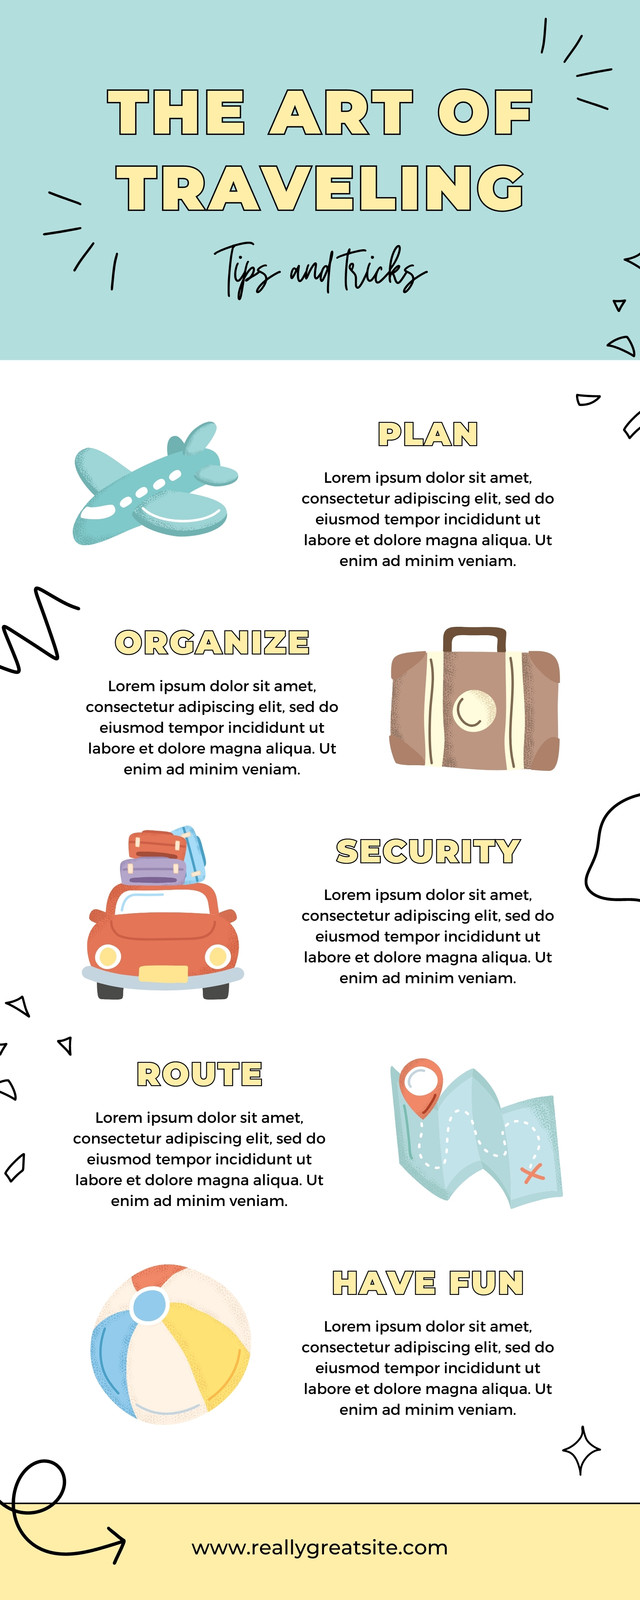 Safety Travel Tips [Infographic]